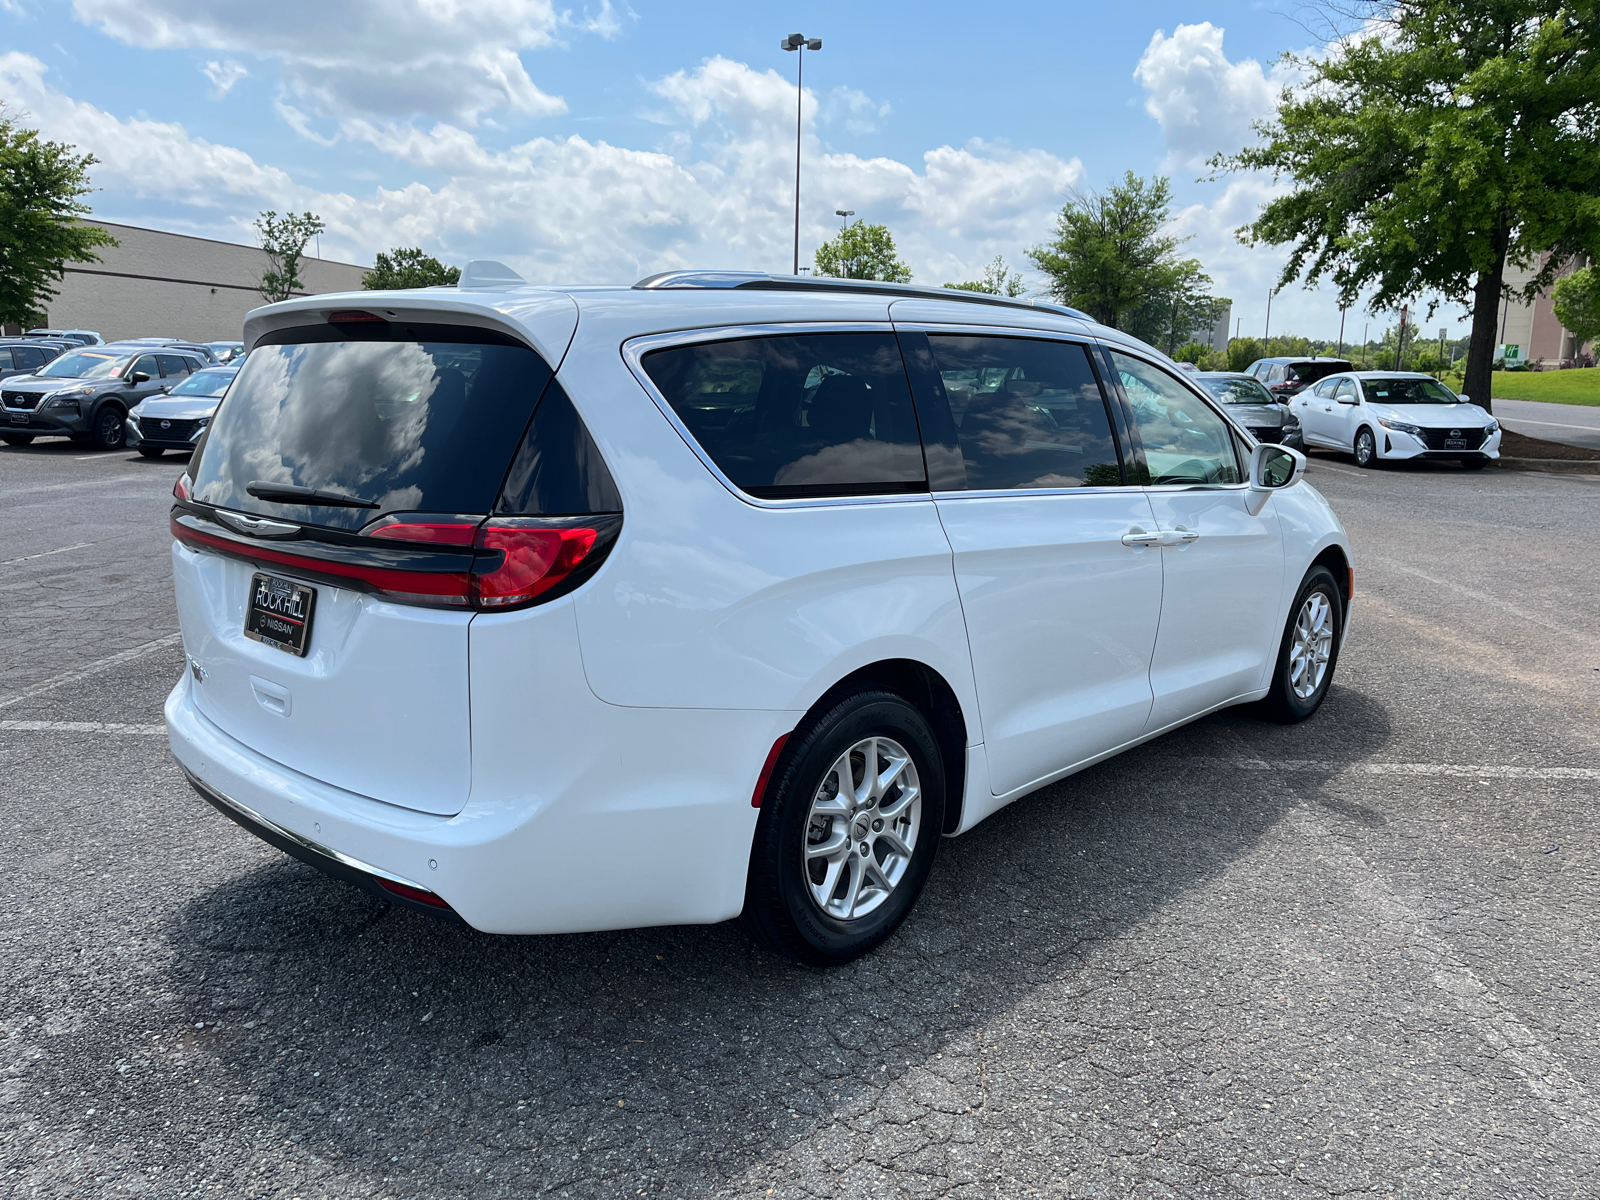 2021 Chrysler Pacifica Touring L 10